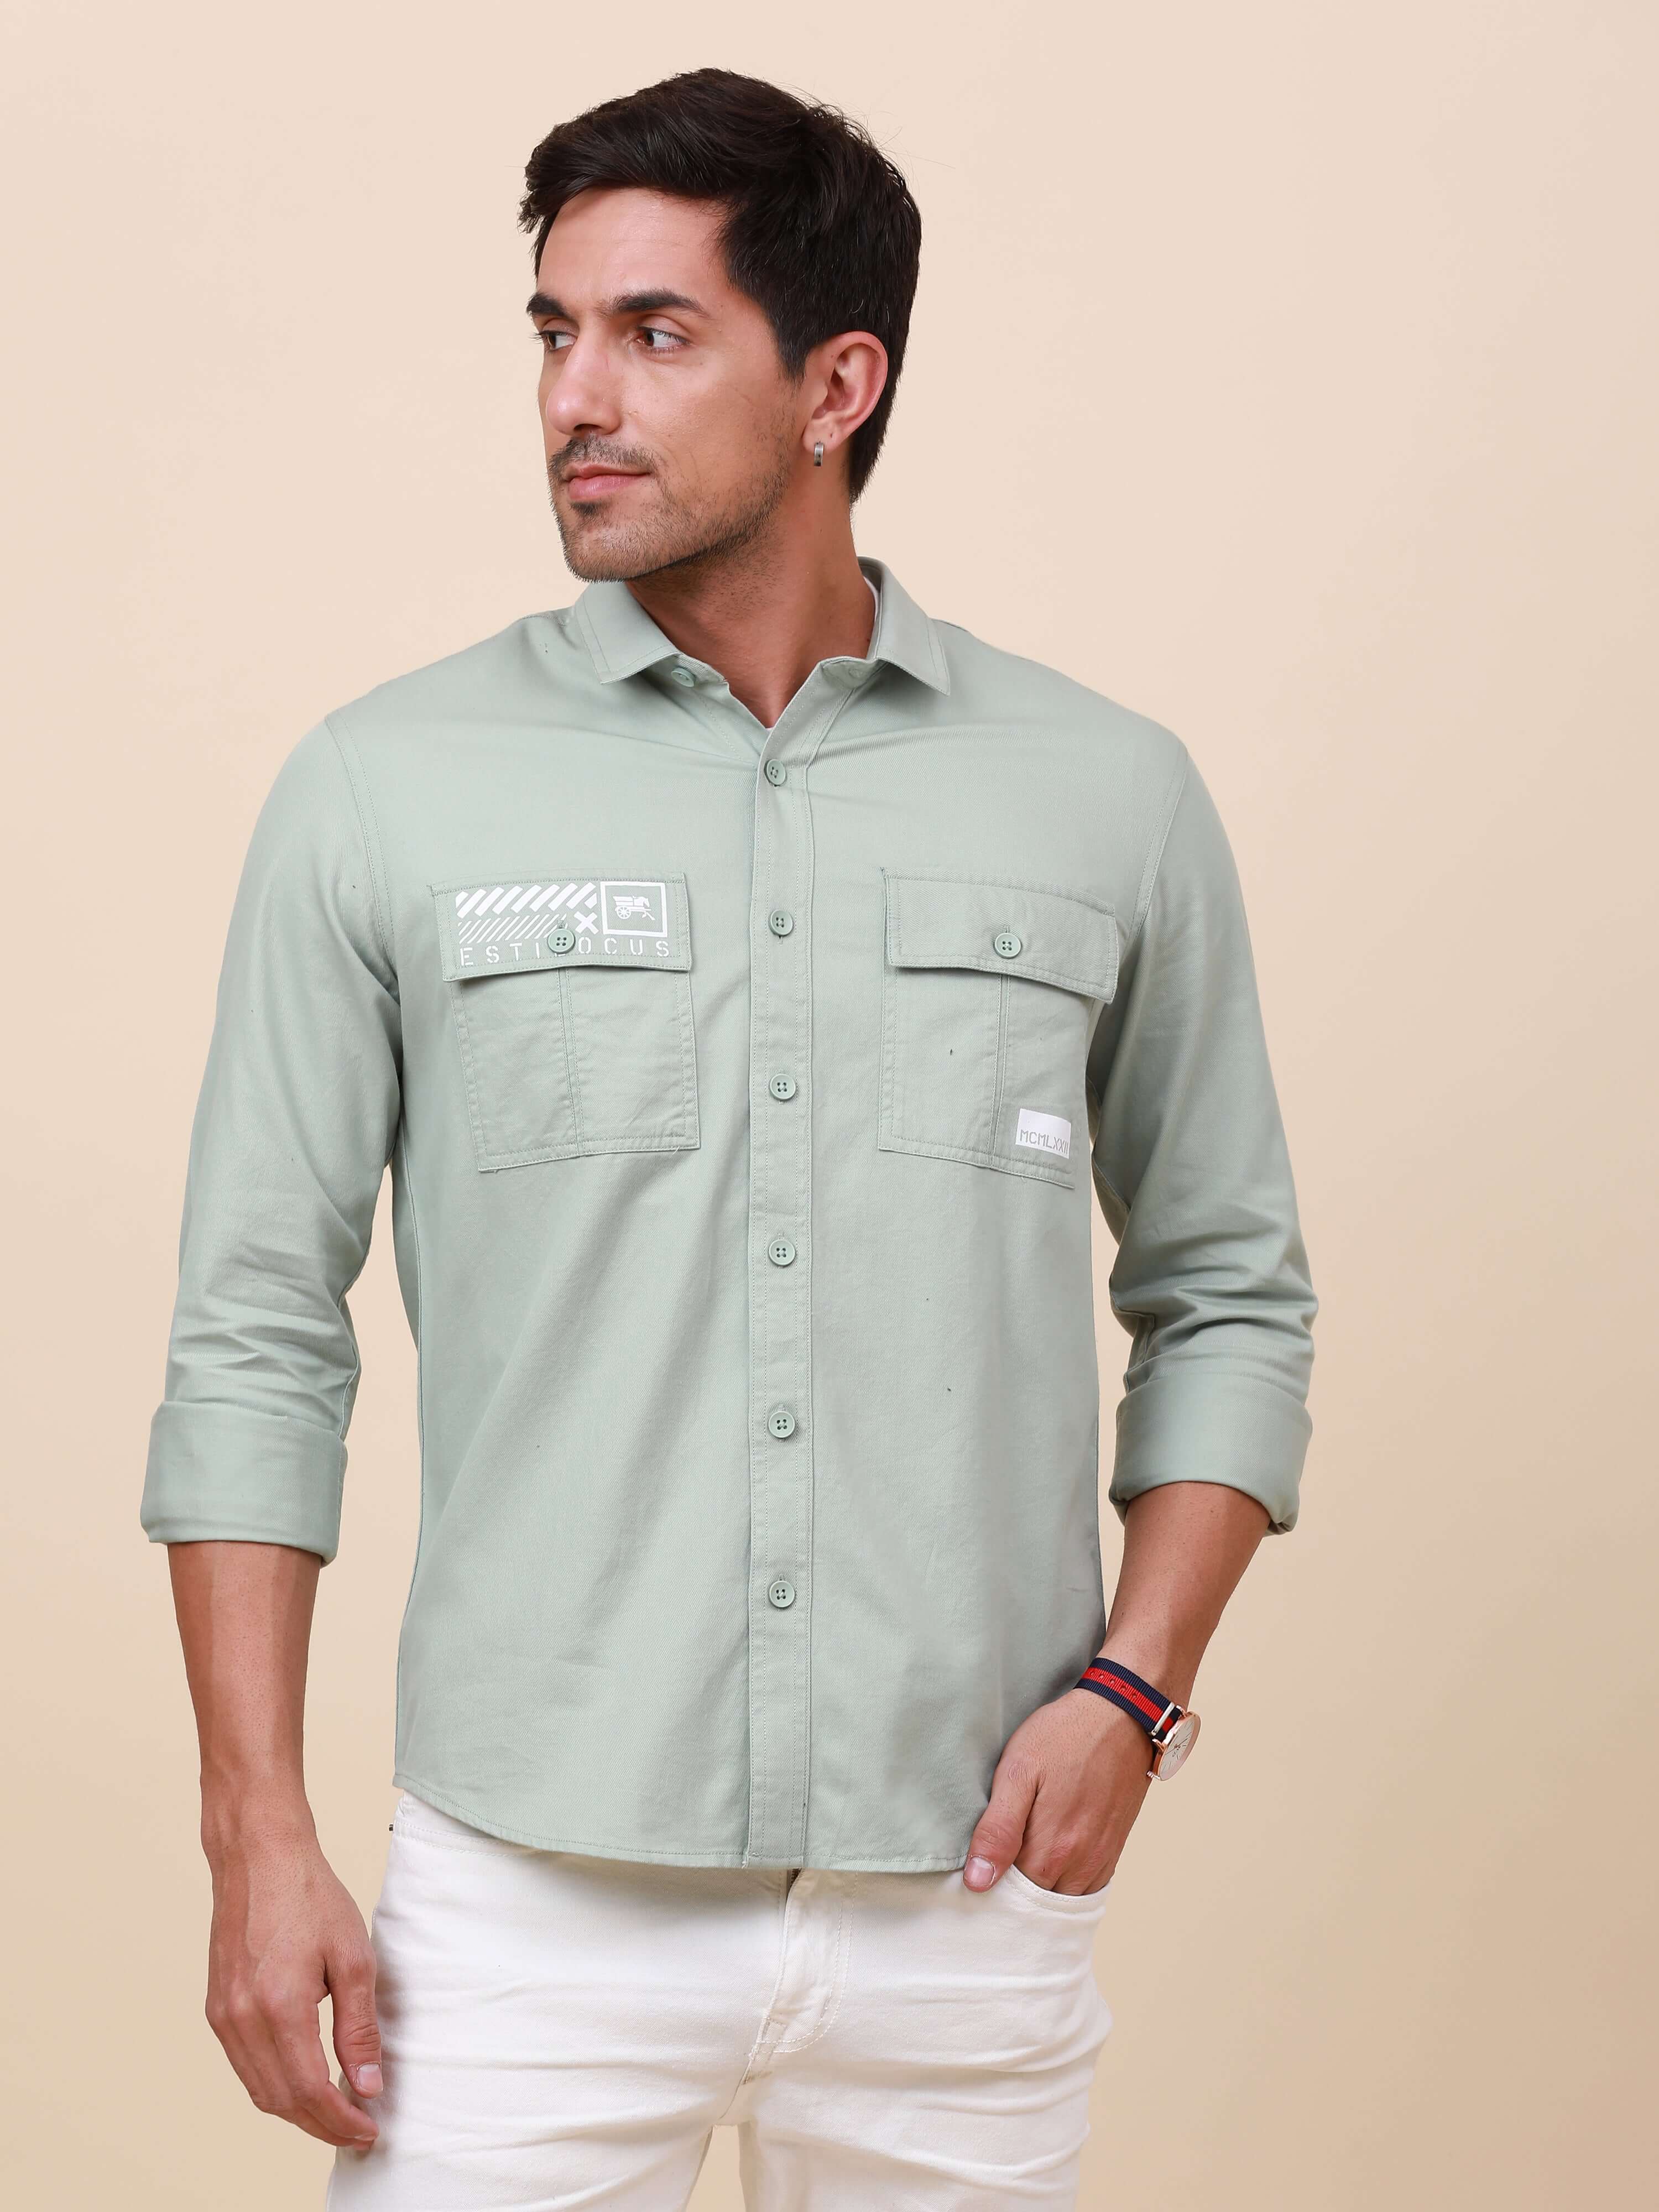 Mint Green Solid Double Pocket Shirt shop online at Estilocus. 100% Cotton , Full-sleeve solid shirt Cut and sew placket Regular collar Double button edge cuff Double pocket with flap Curved bottom hemline Finest printing at pocket . All double needle con